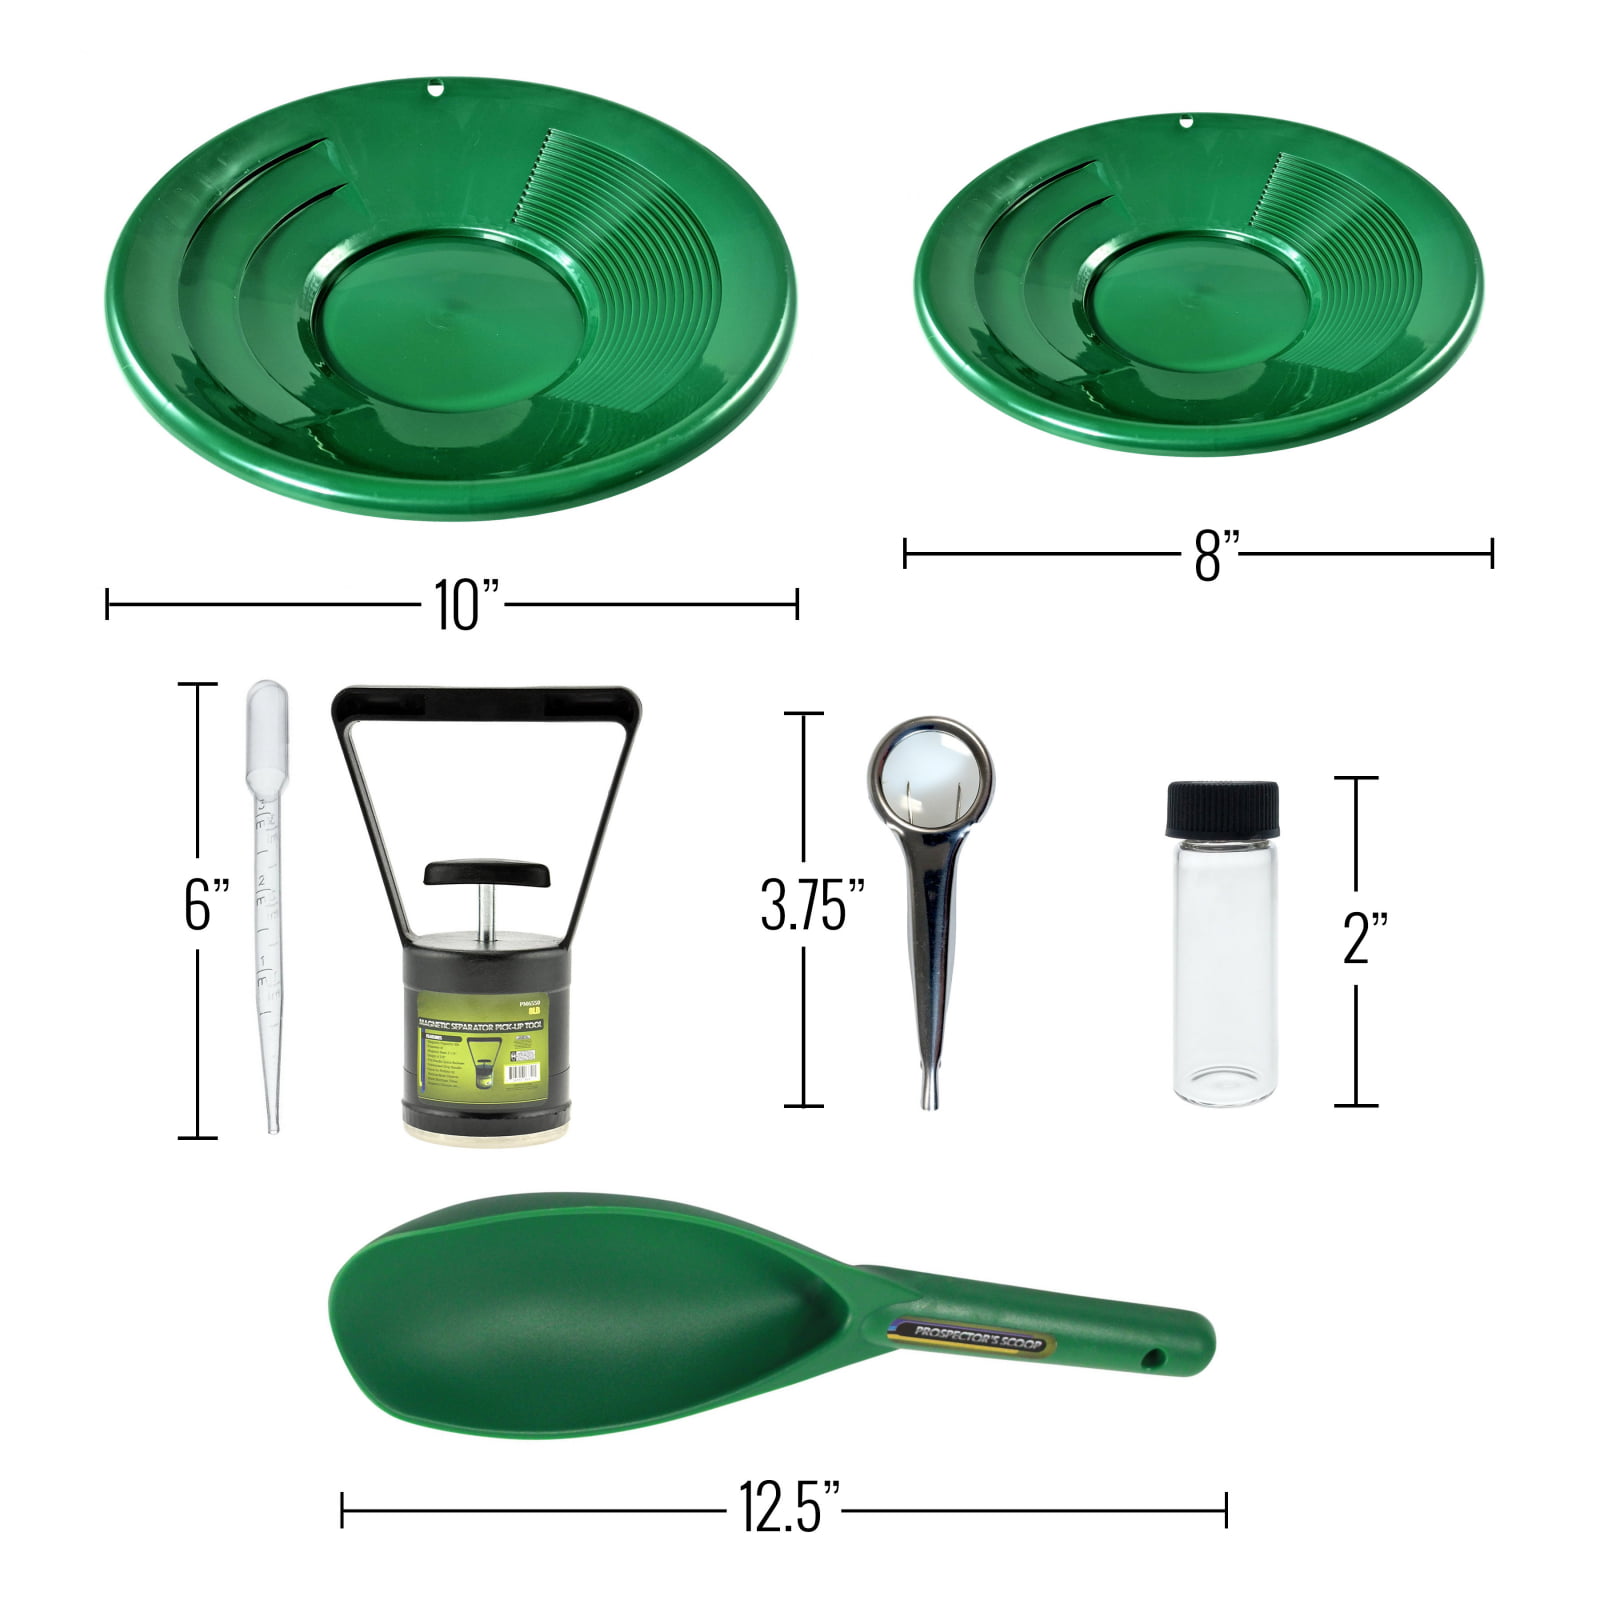 ASR Outdoor 11pc Gold Rush Gold Prospecting Kit 1/8 & 1/2 Coarse Classifier  Screen, Vials, Dual Riffle Gold Pans